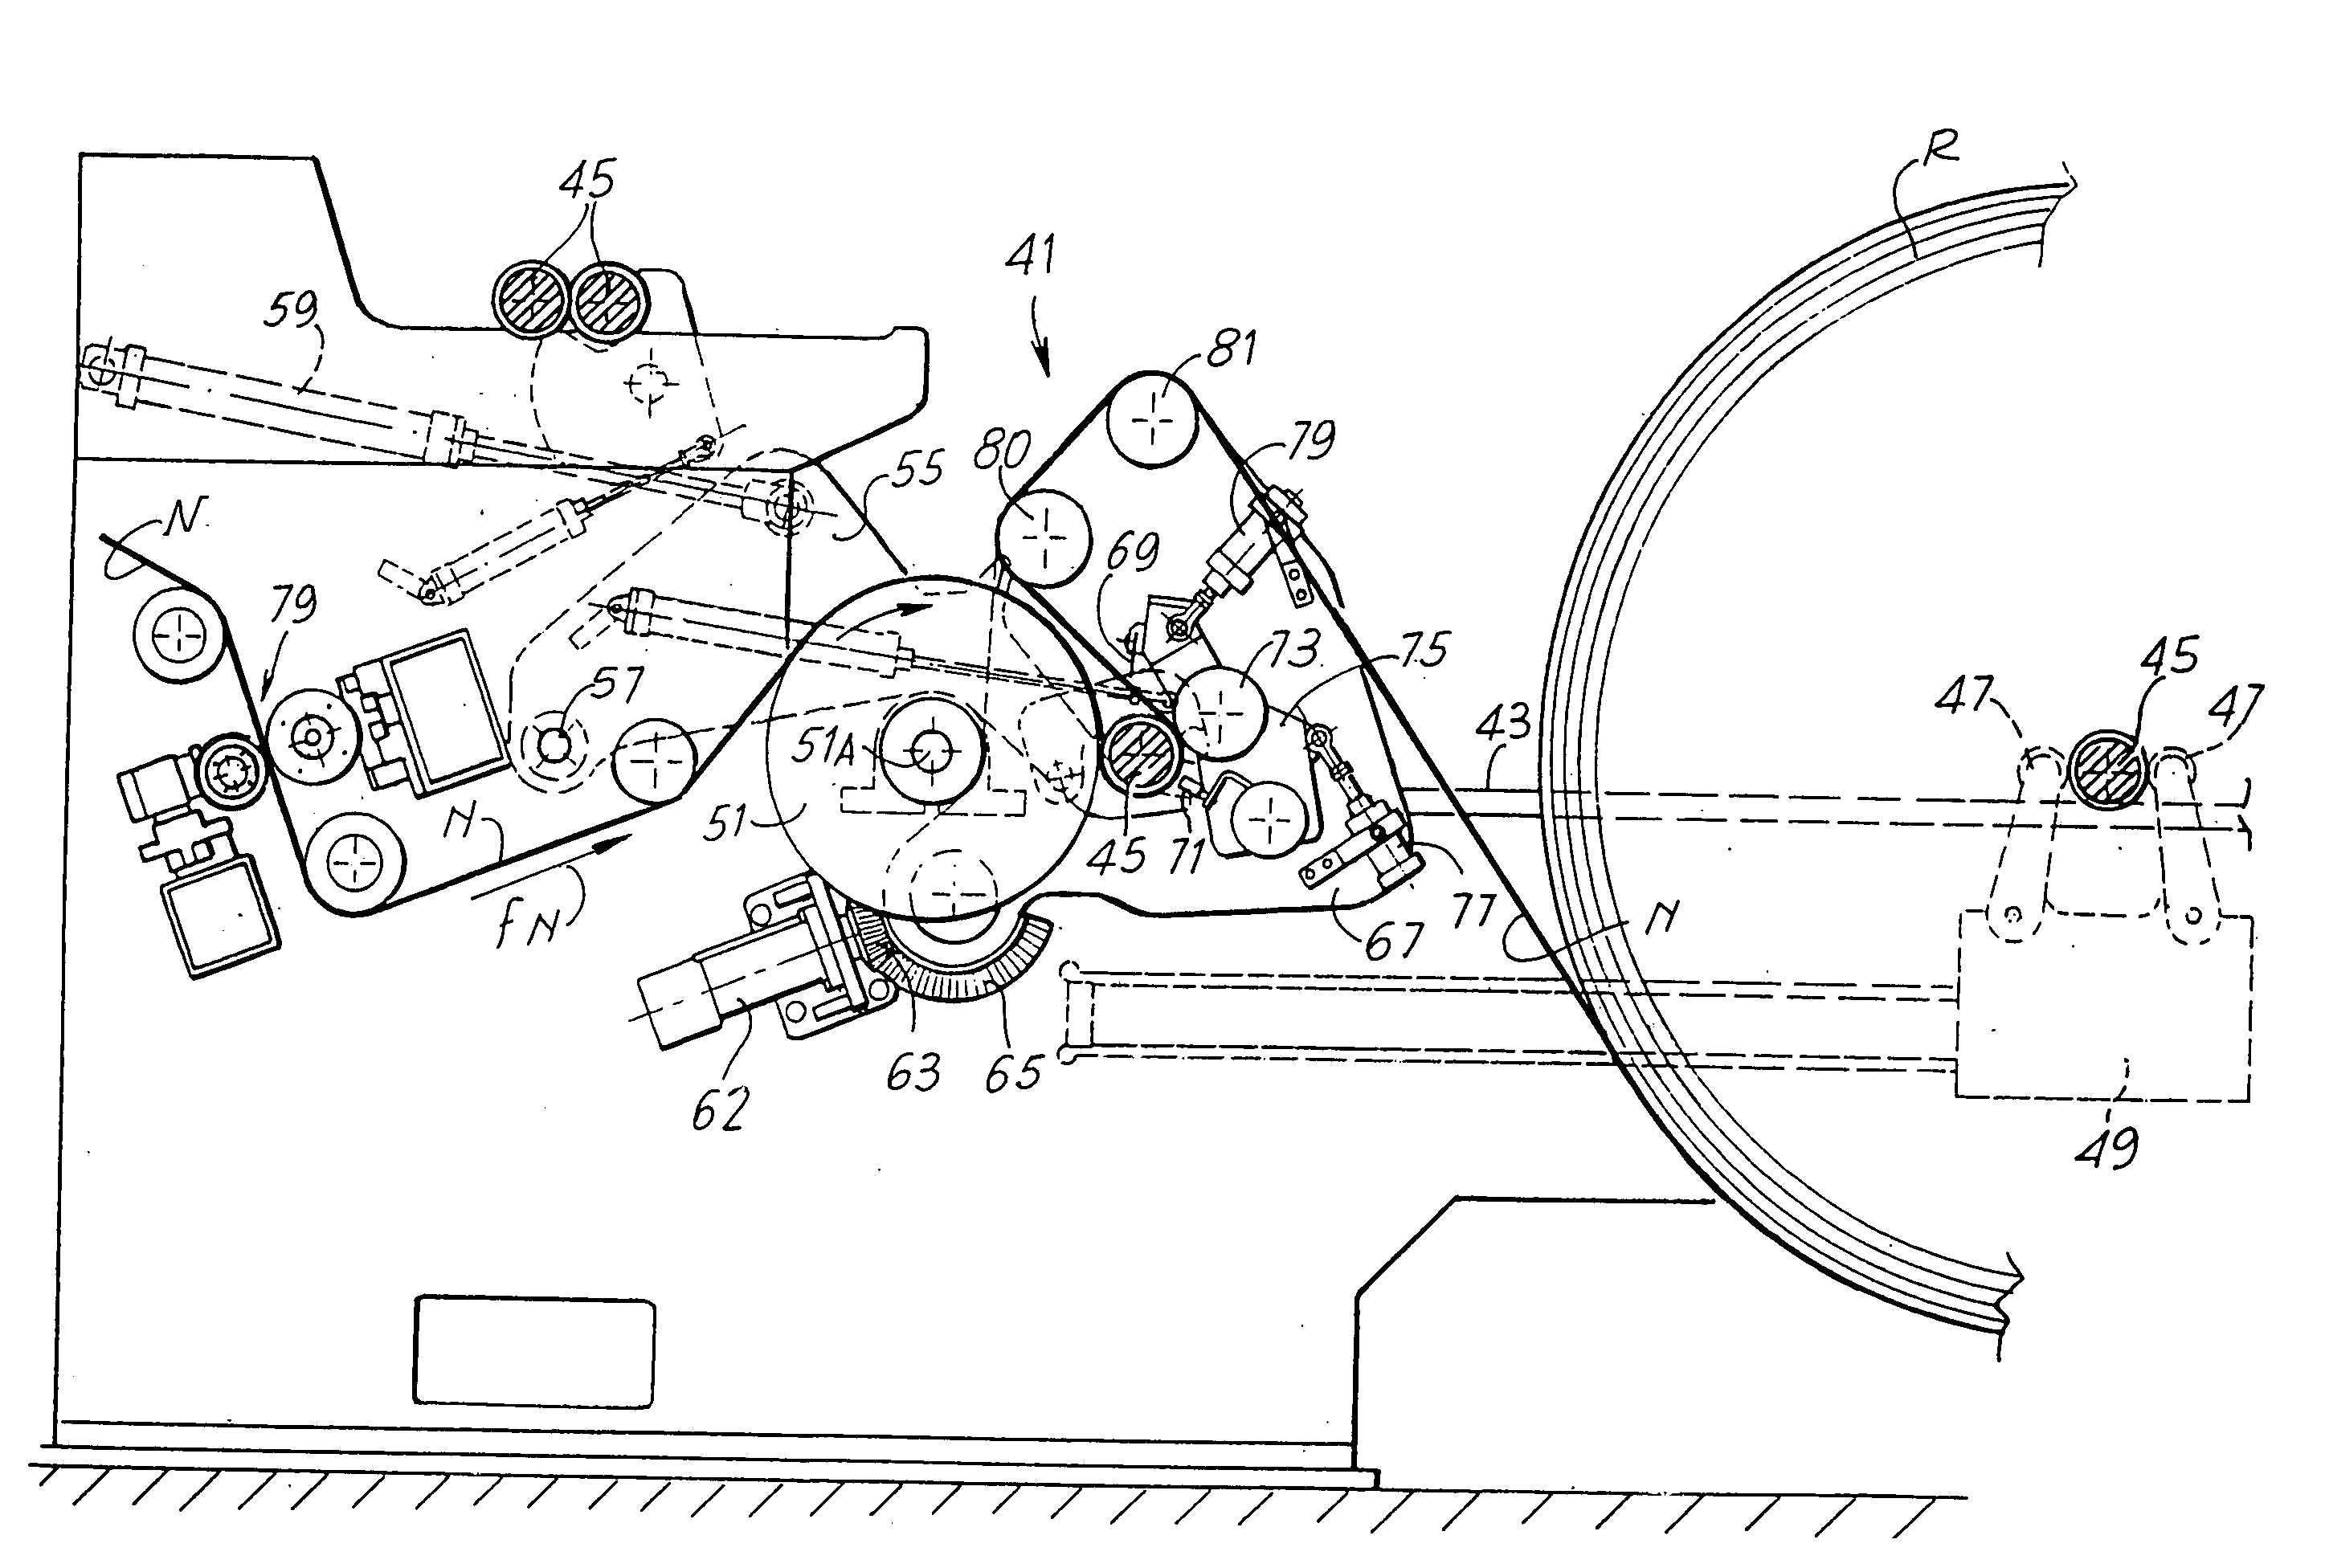 Winding or rewinding machine for producing rolls of web material around a winding spindle and relative winding method